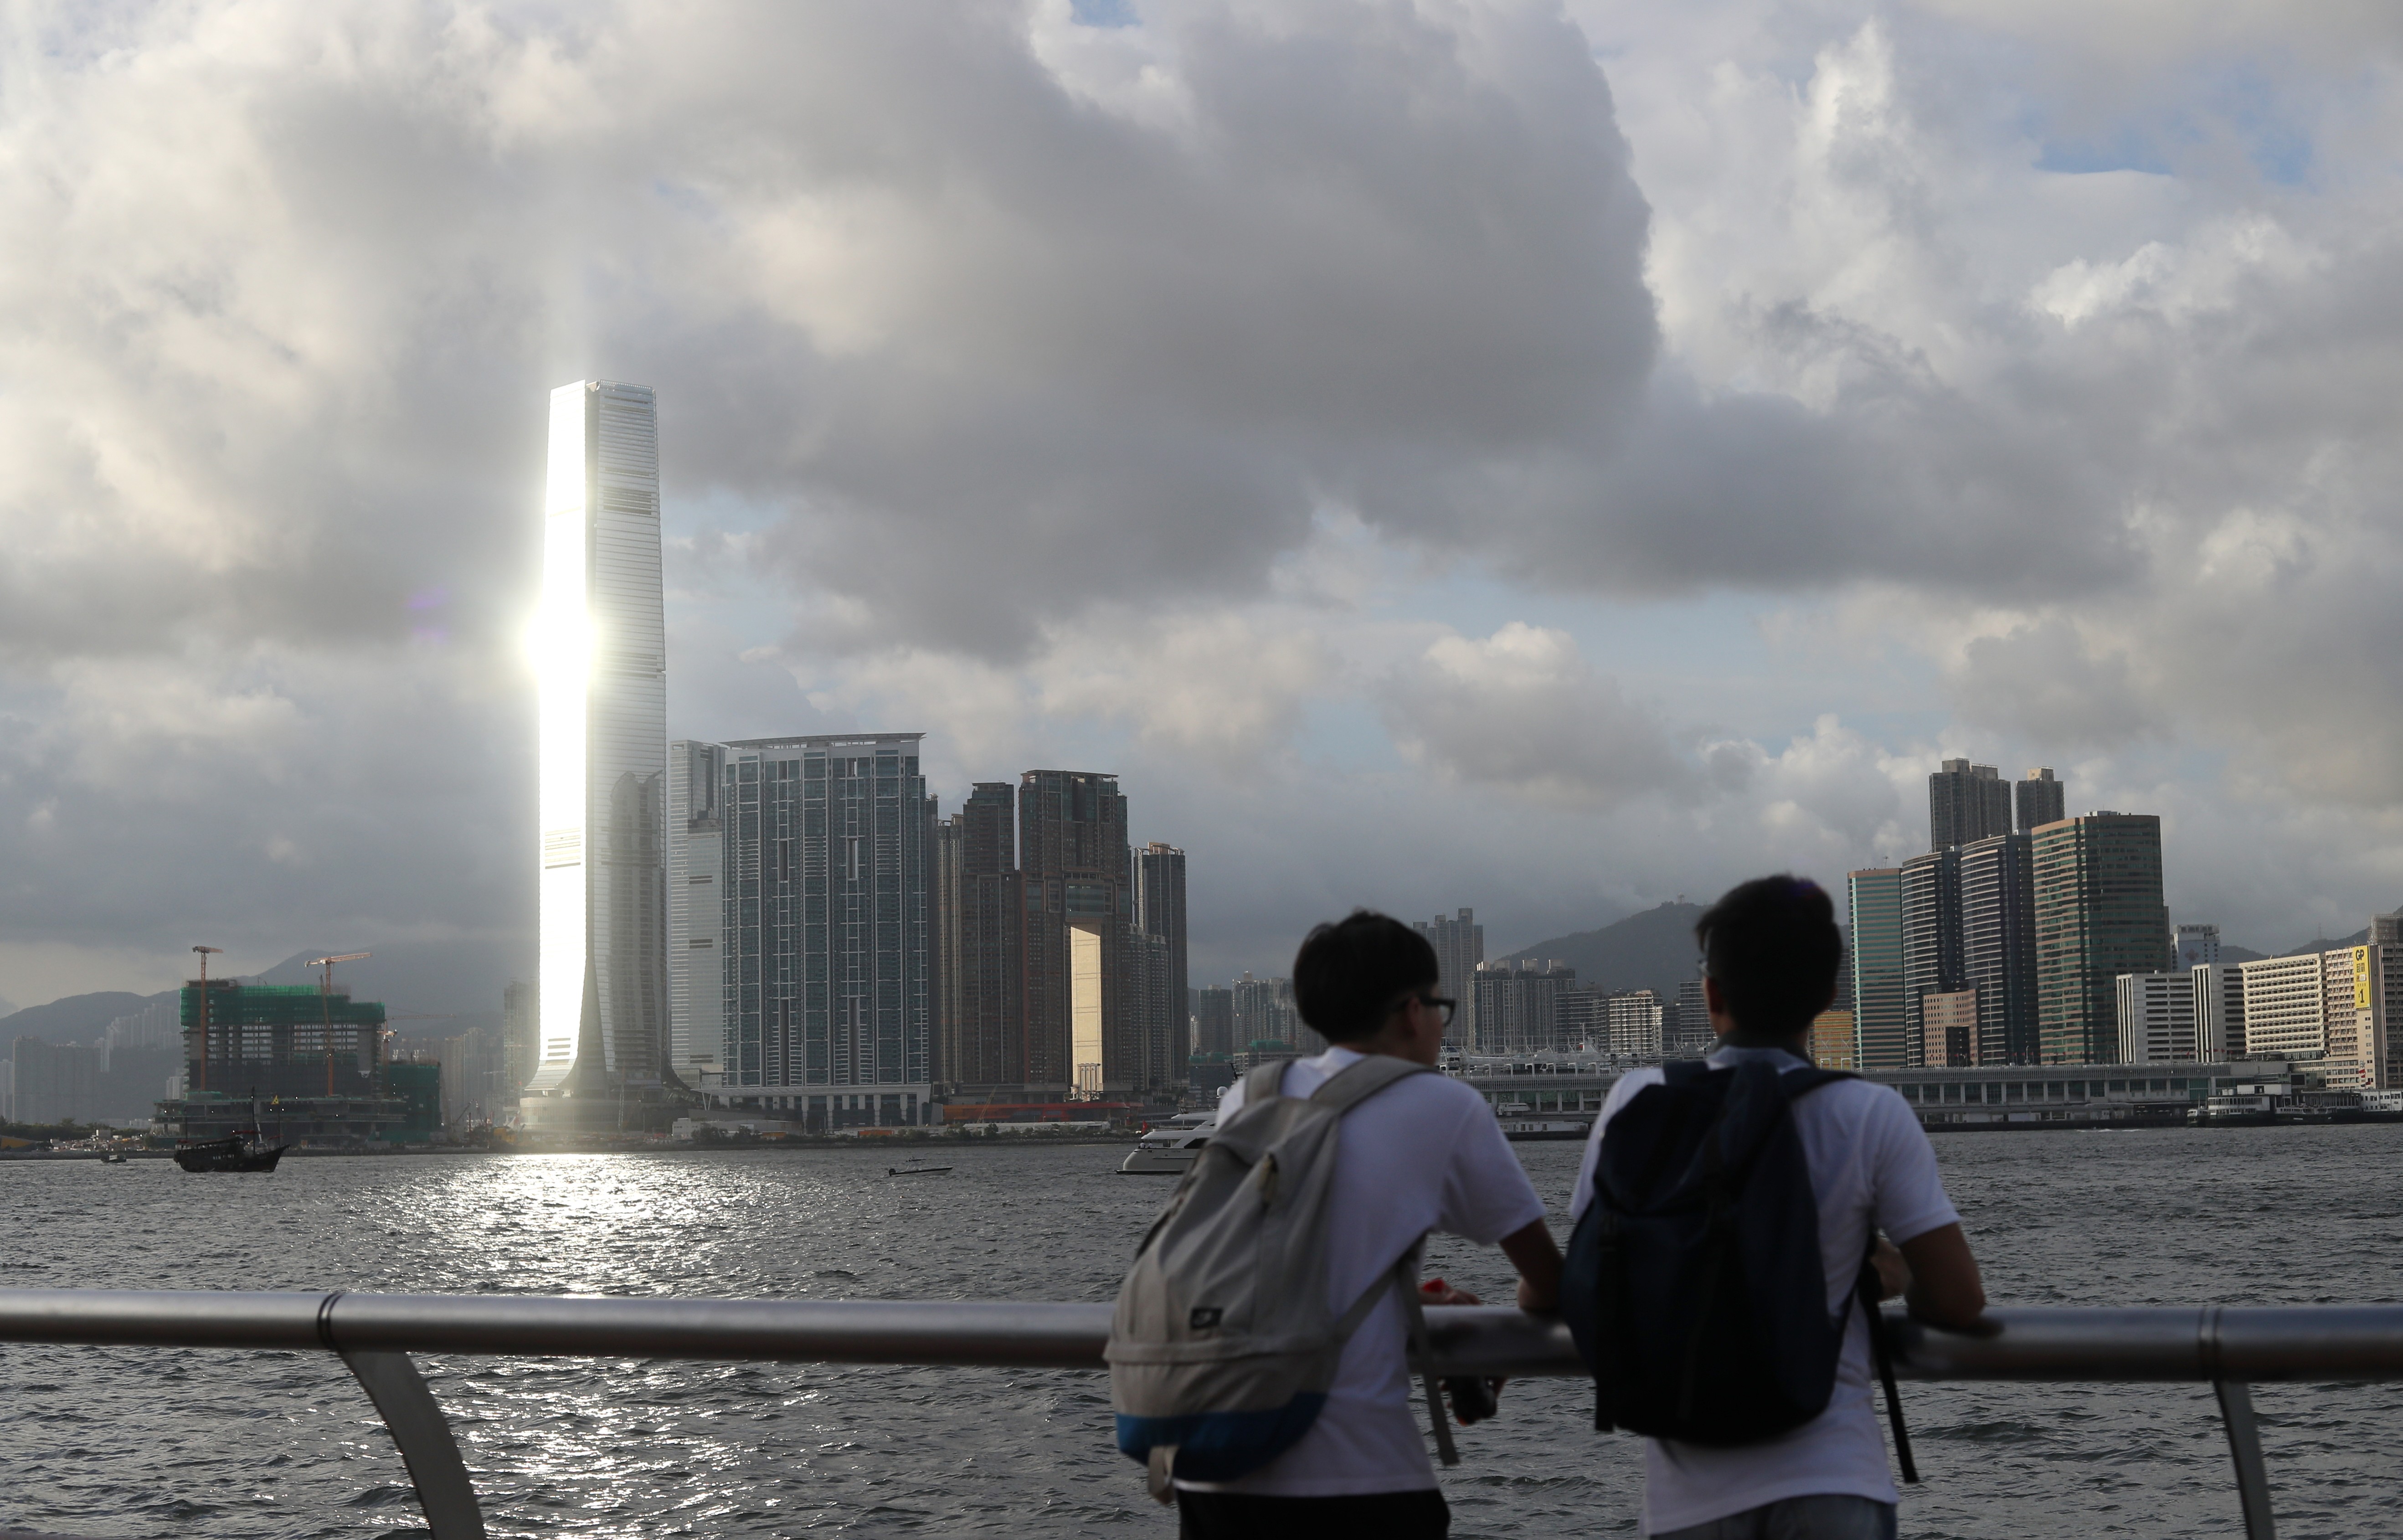 The US-China trade war has taken a turn for the worse, bringing a gloomy outlook for Hong Kong, which is caught in the crossfire. Photo: Winson Wong